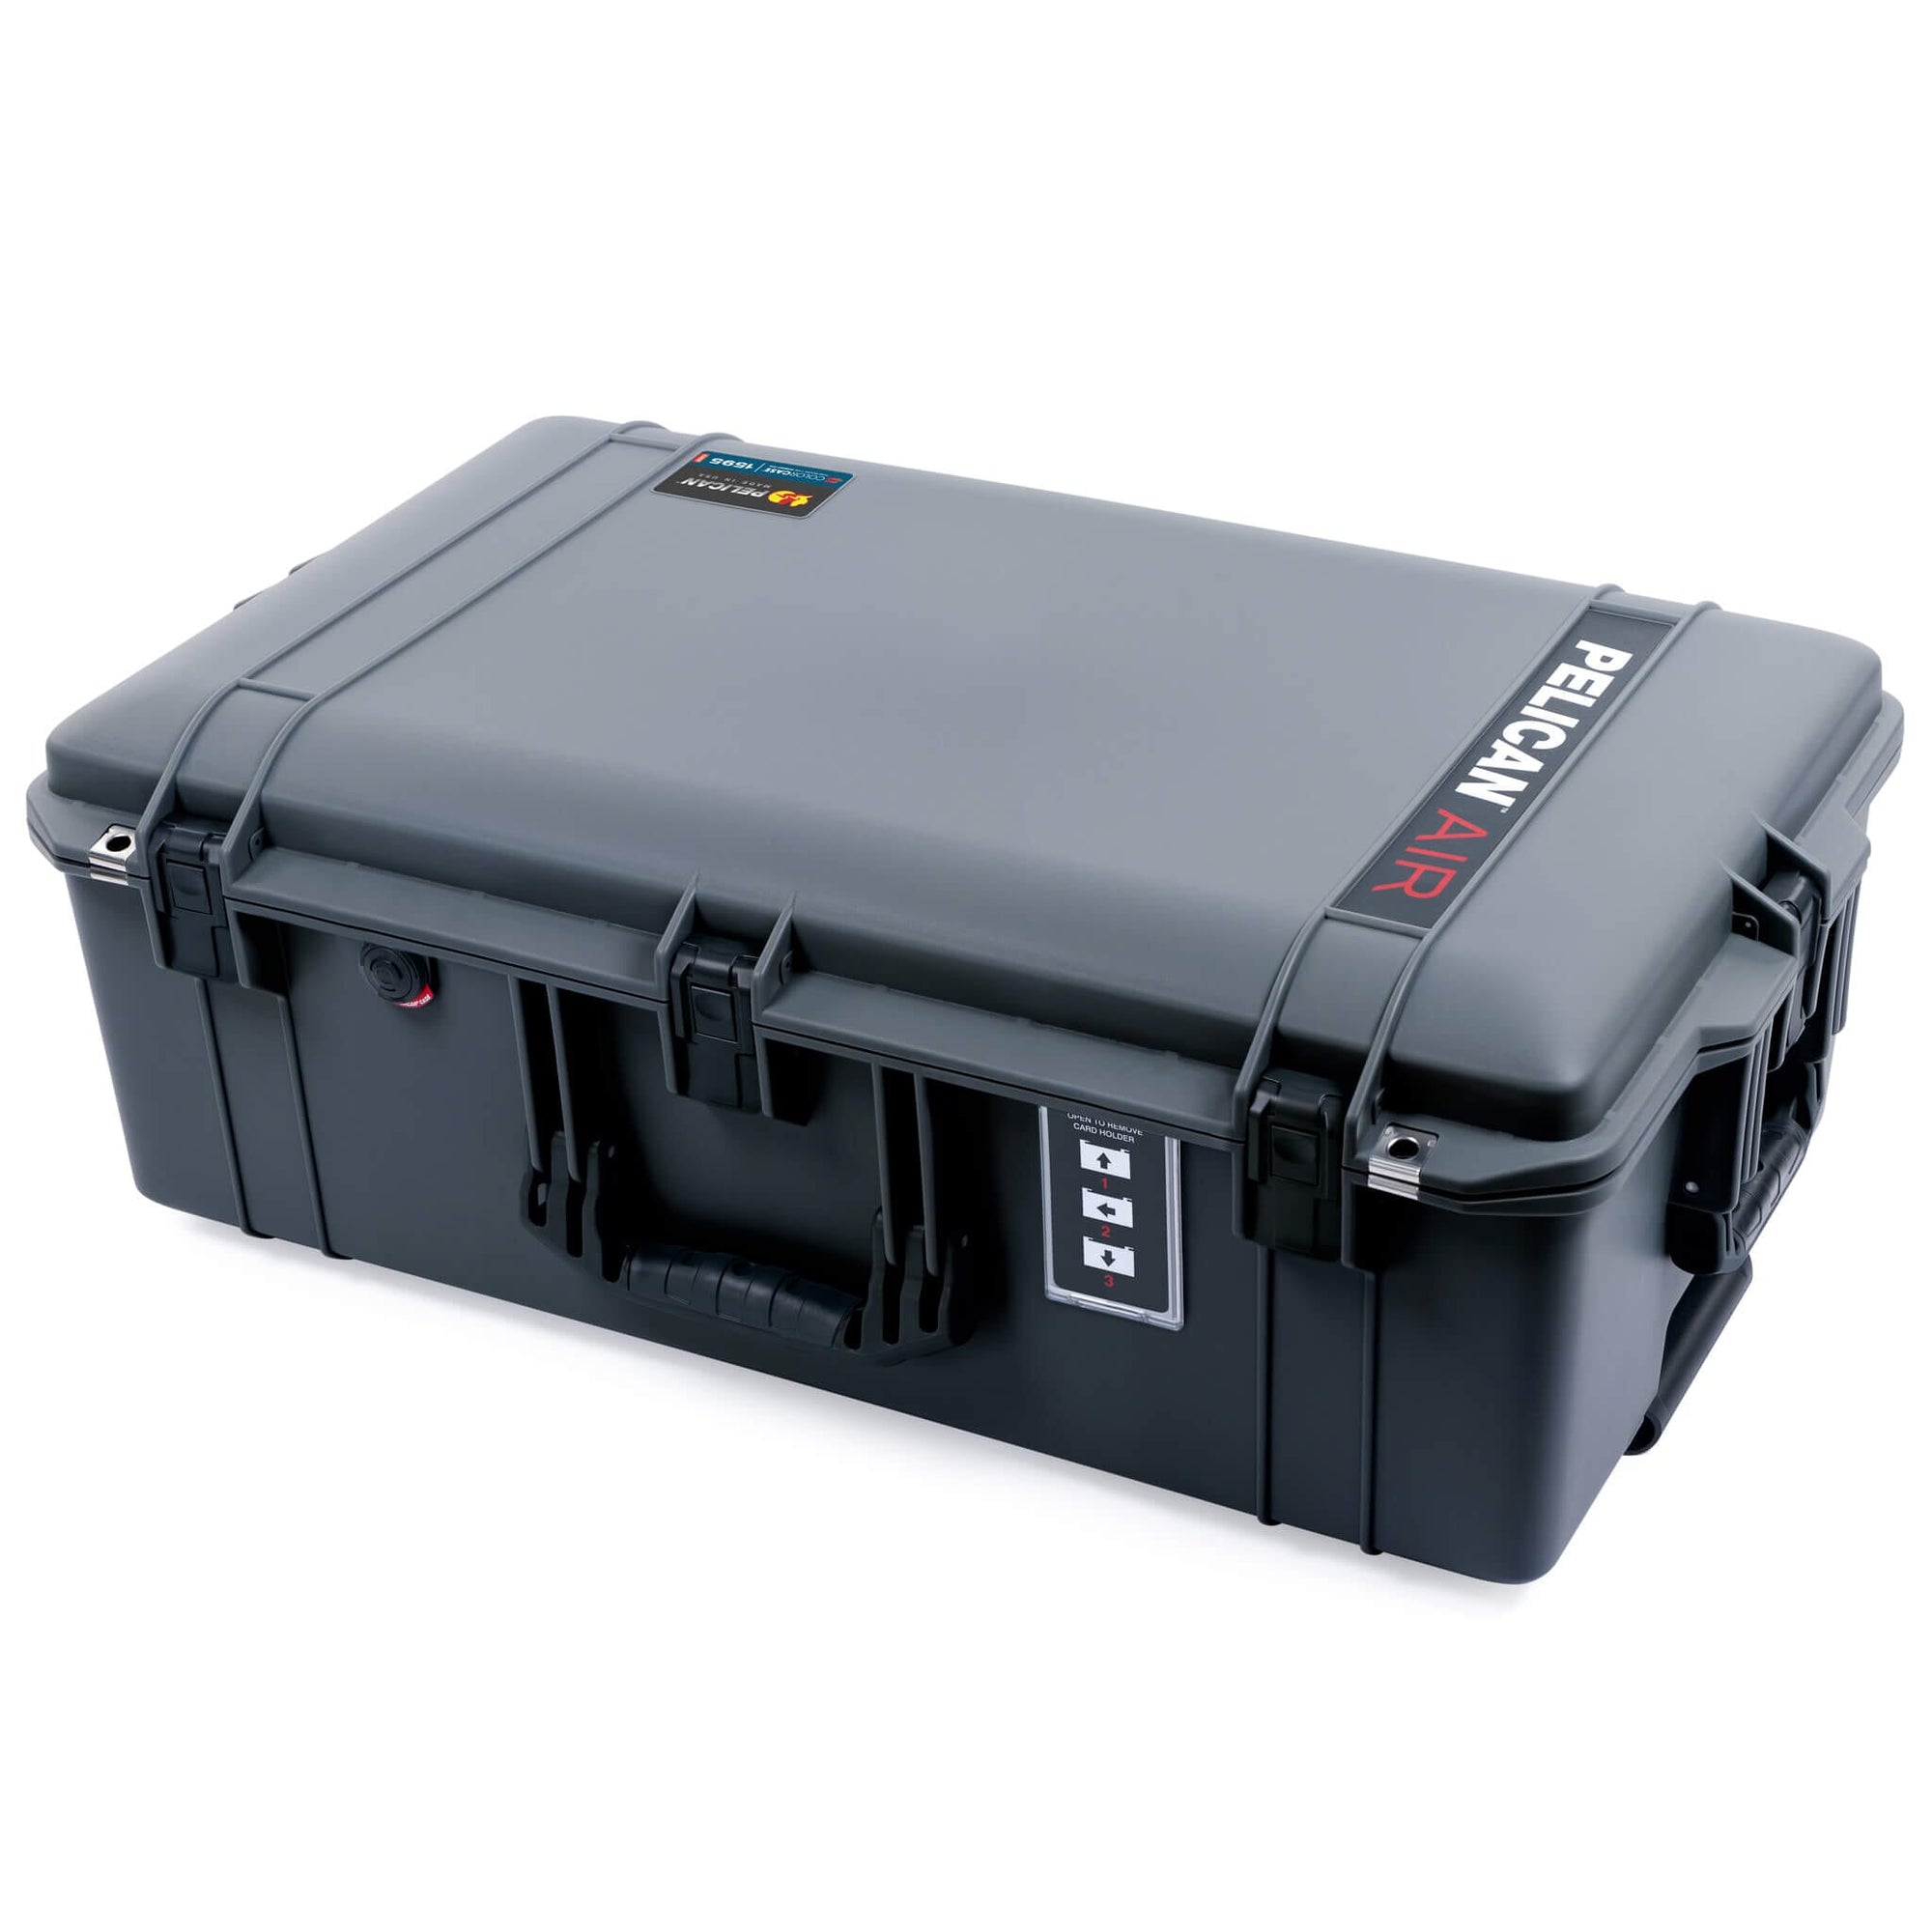 Pelican 1595 Air Case, Charcoal with Black Handles & Latches ColorCase 